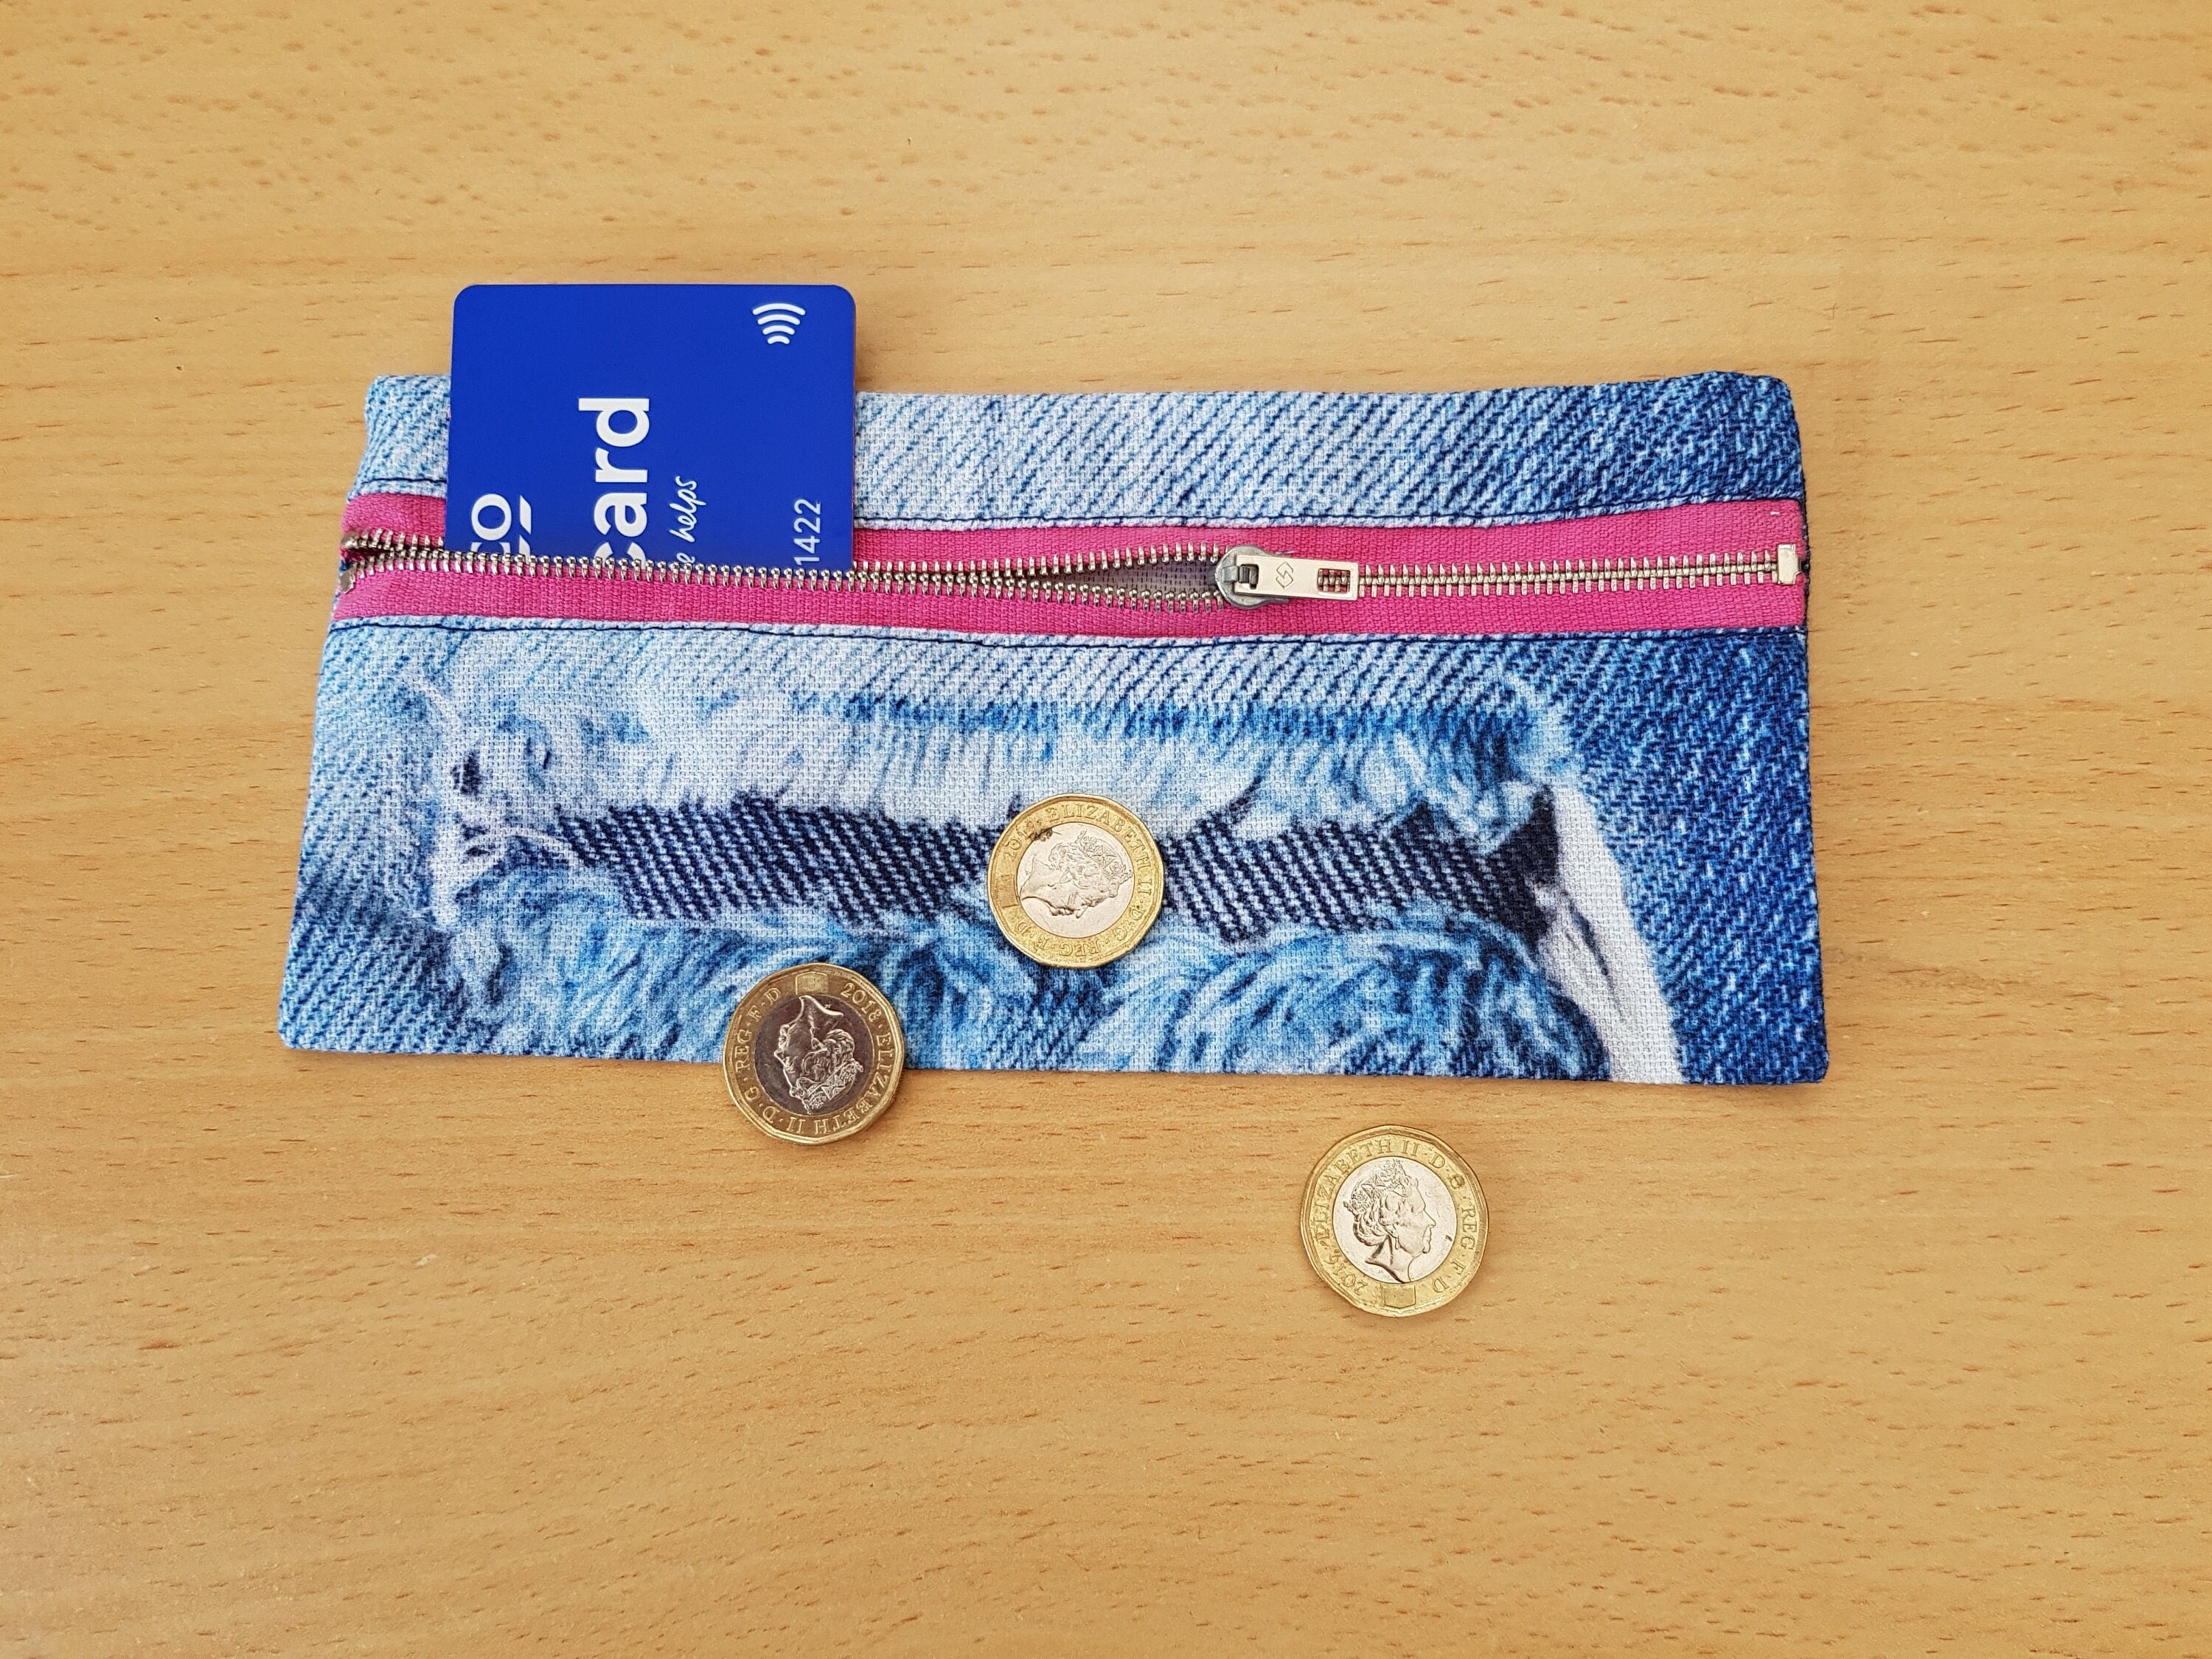 Birthday Gifts, Stocking Filler for Kids, Ripped Denim Look Like Coin  Purse, Denim Coin Purse, Denim Pencil Case, Money Pouch, Pouch Wallet 